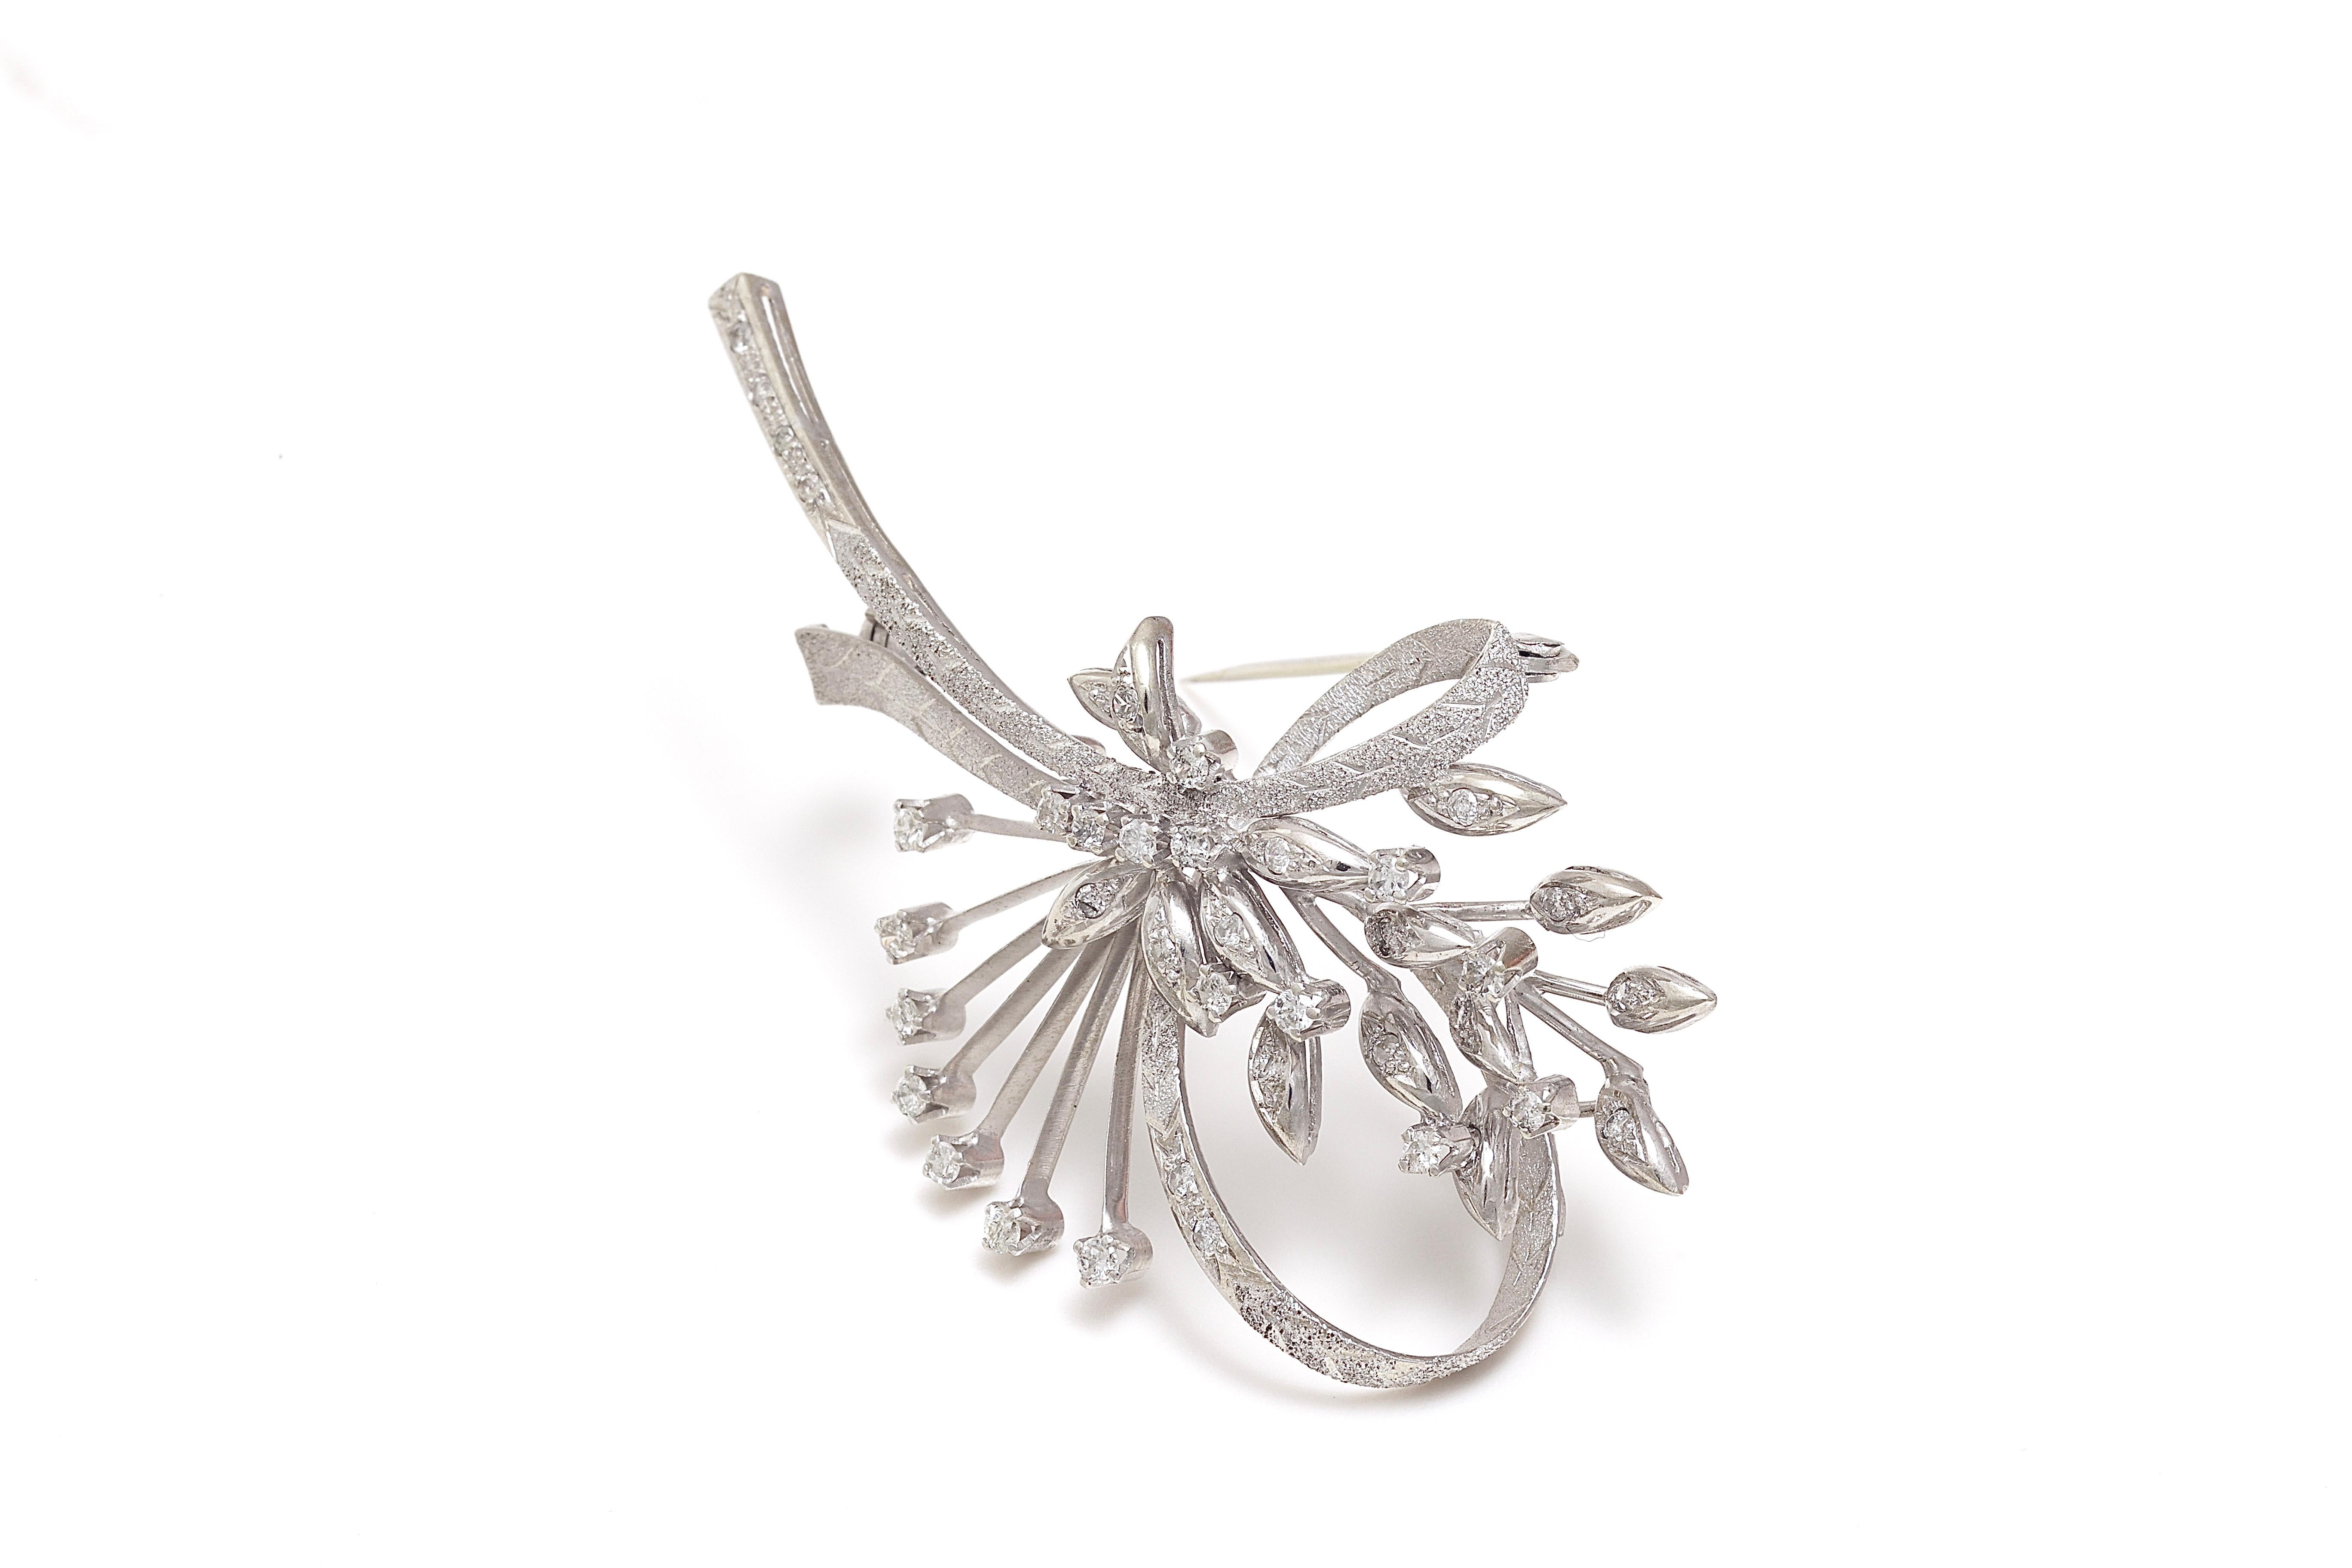  18 kt. White Gold Brooch with 1.52 ct. Brilliant Cut Diamonds For Sale 4